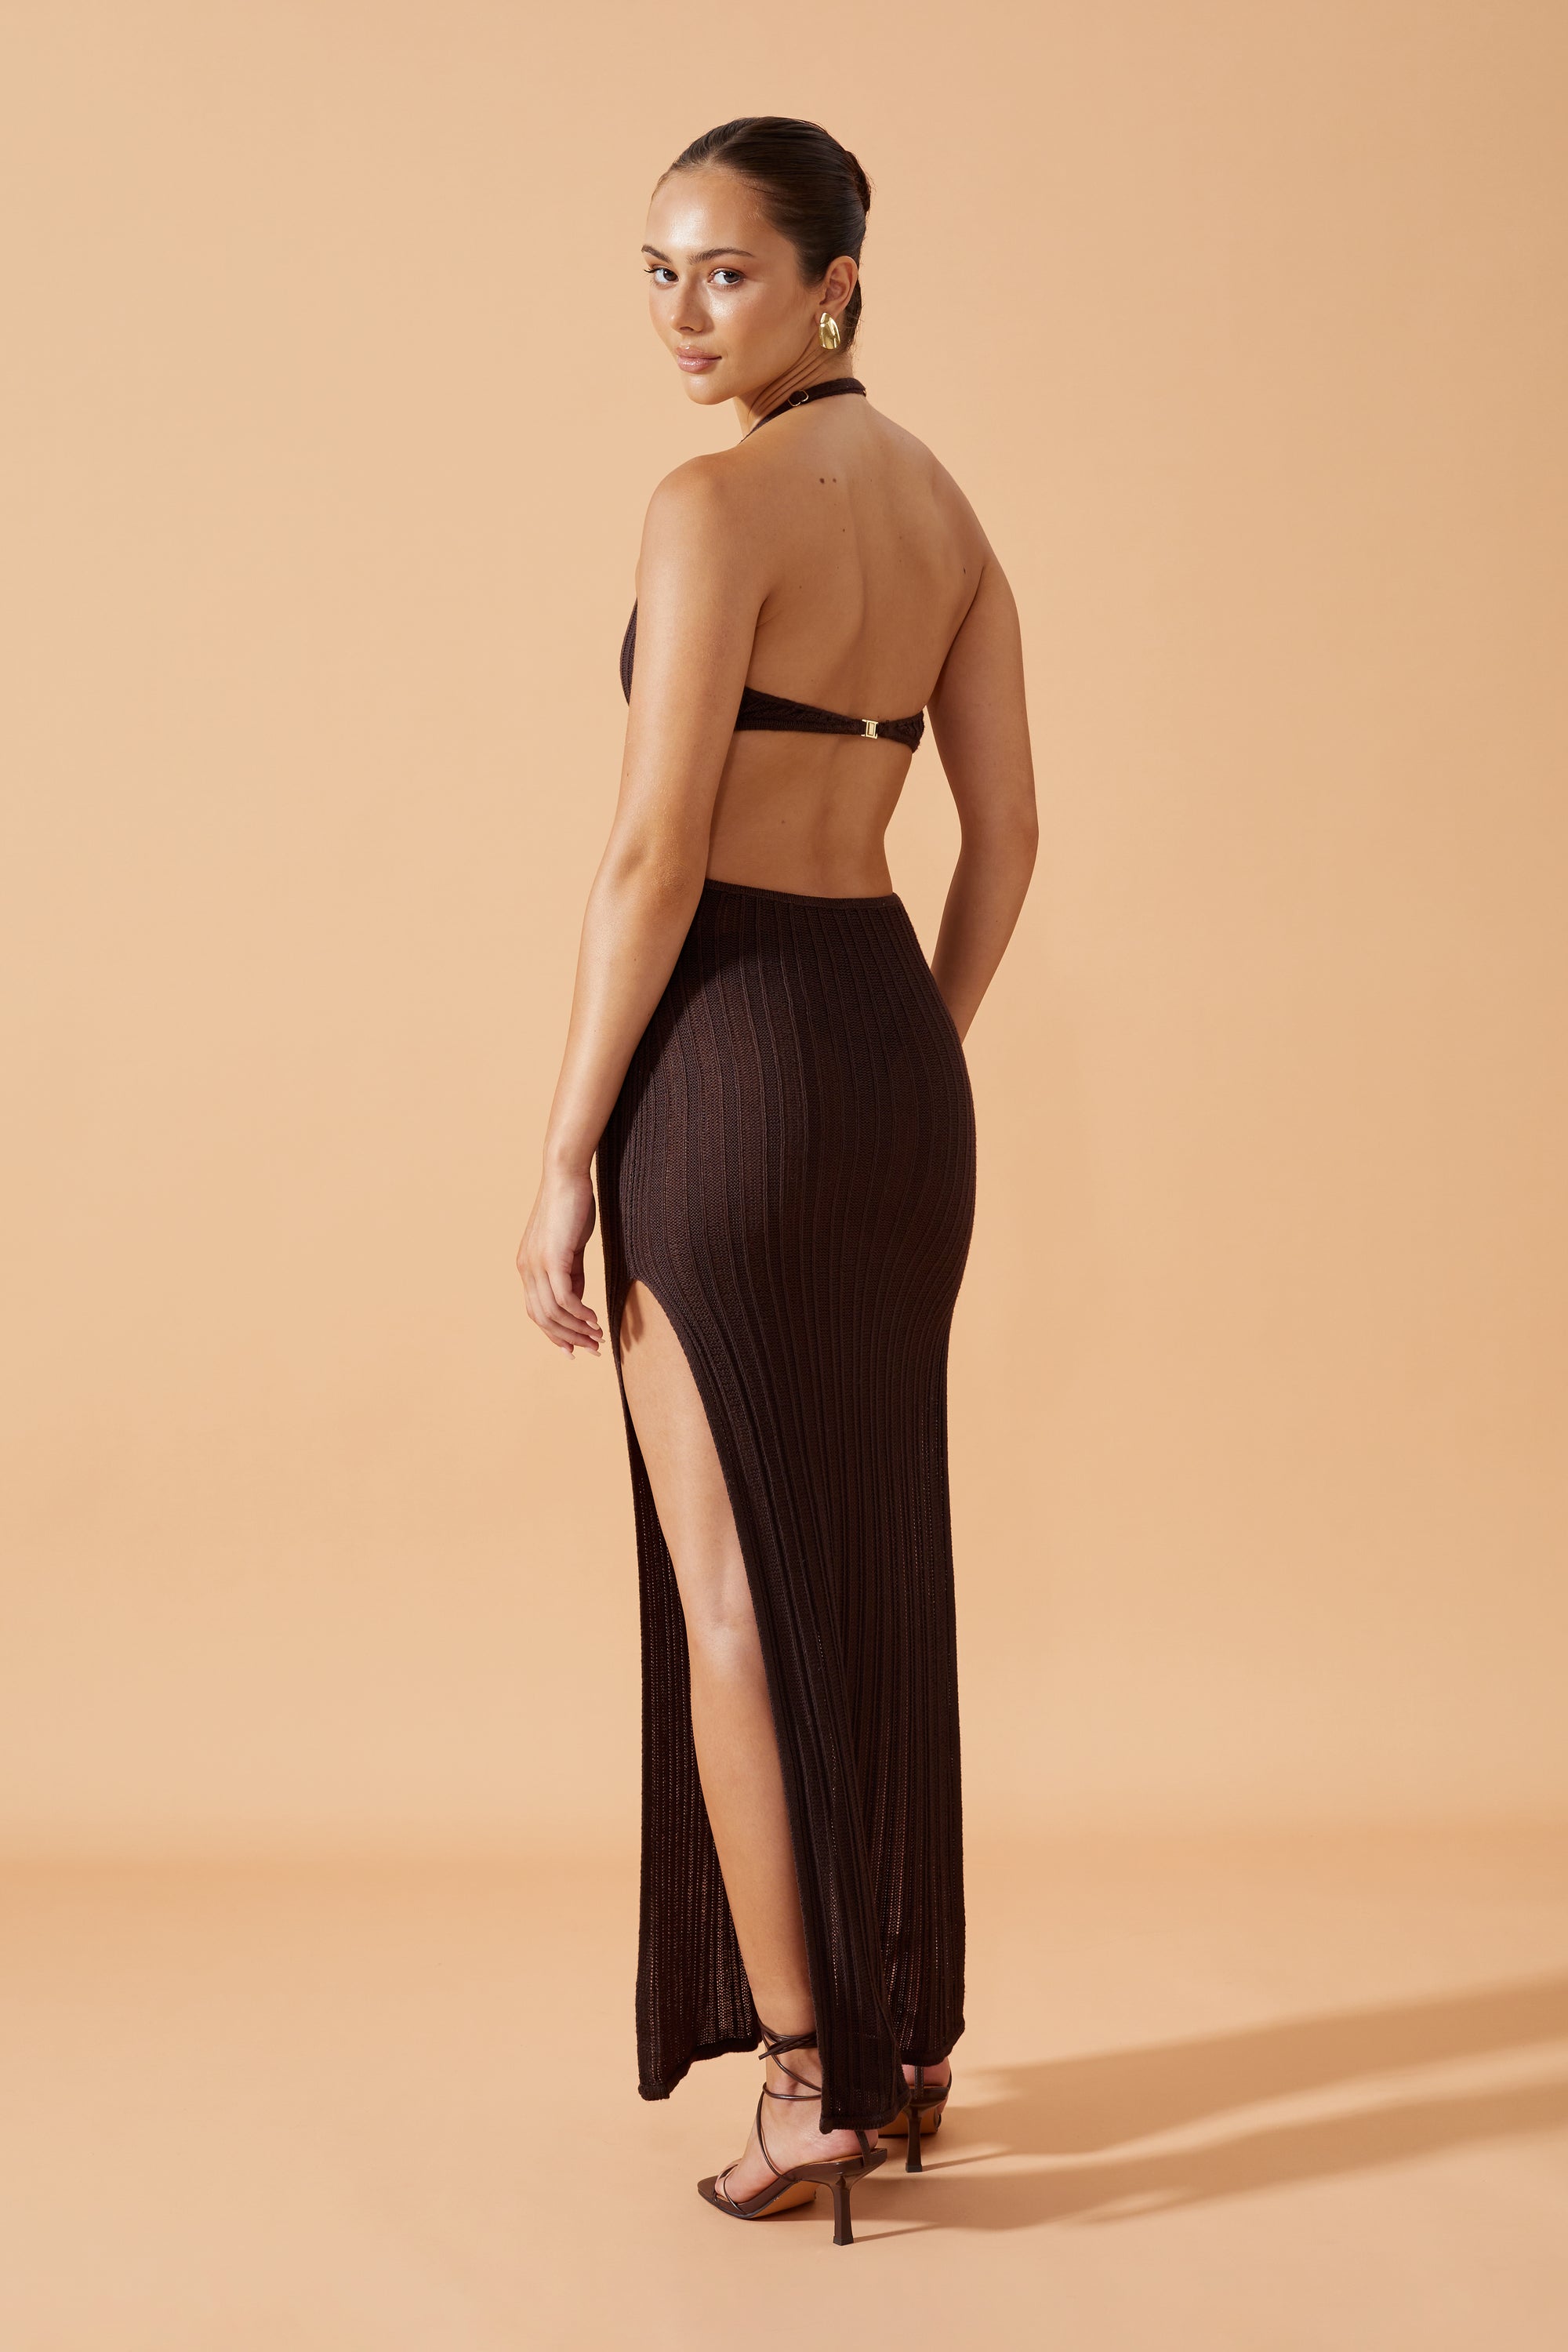 Flook The Label Giina Kitted Dress in Chocolate. Cut outs on the side and side slit. and clasp at the back. Back View